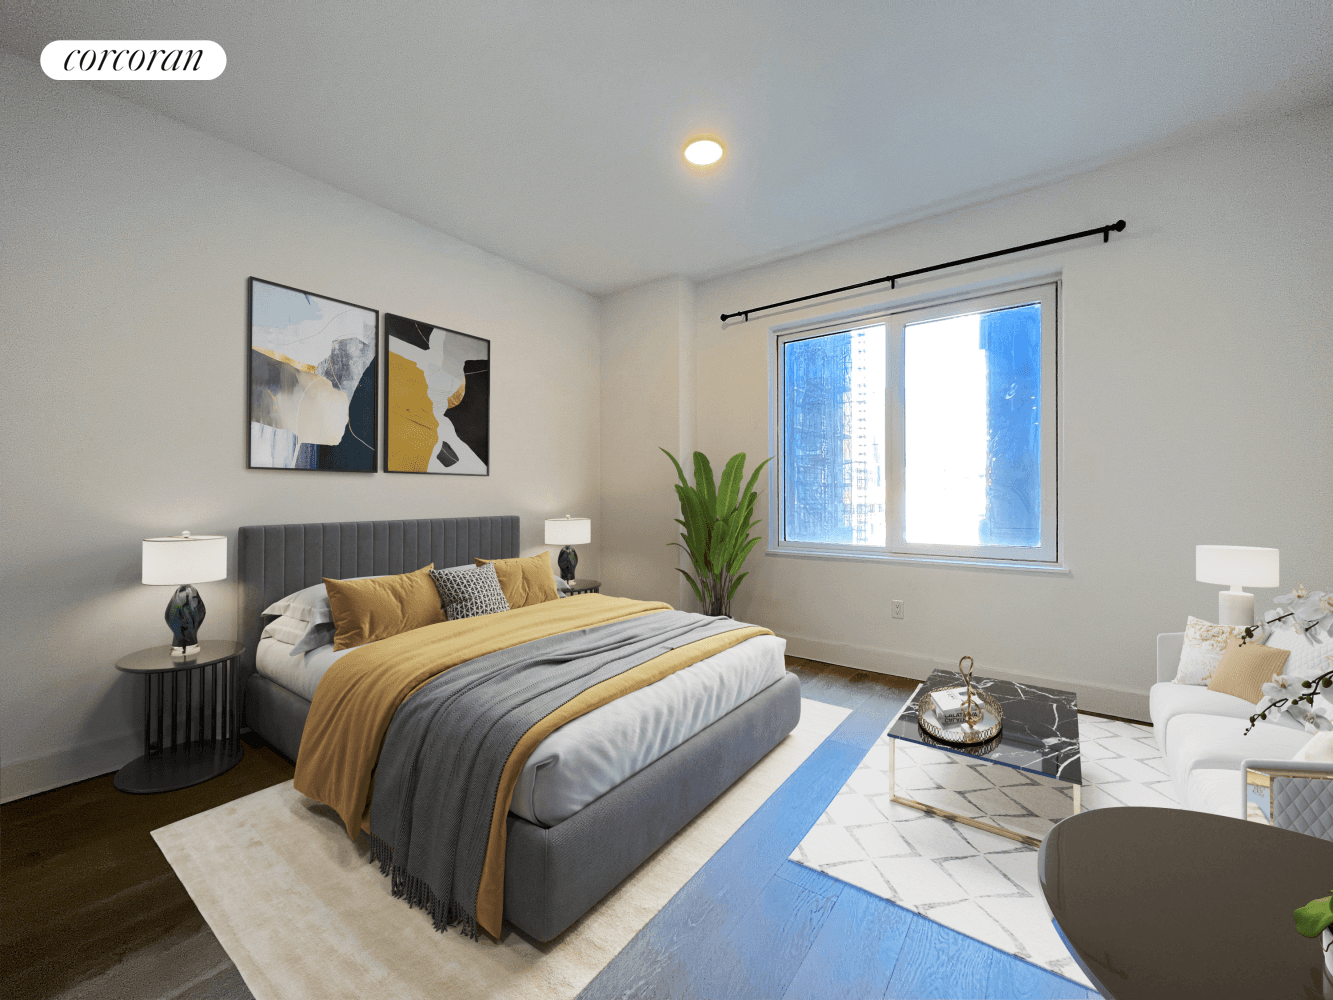 Beautiful Studio at The Brooklyn Groove which designed by ODA New York, this lovely home comes with wide plank oak flooring throughout, beautiful gallery kitchen with custom rift oak cabinetry ...